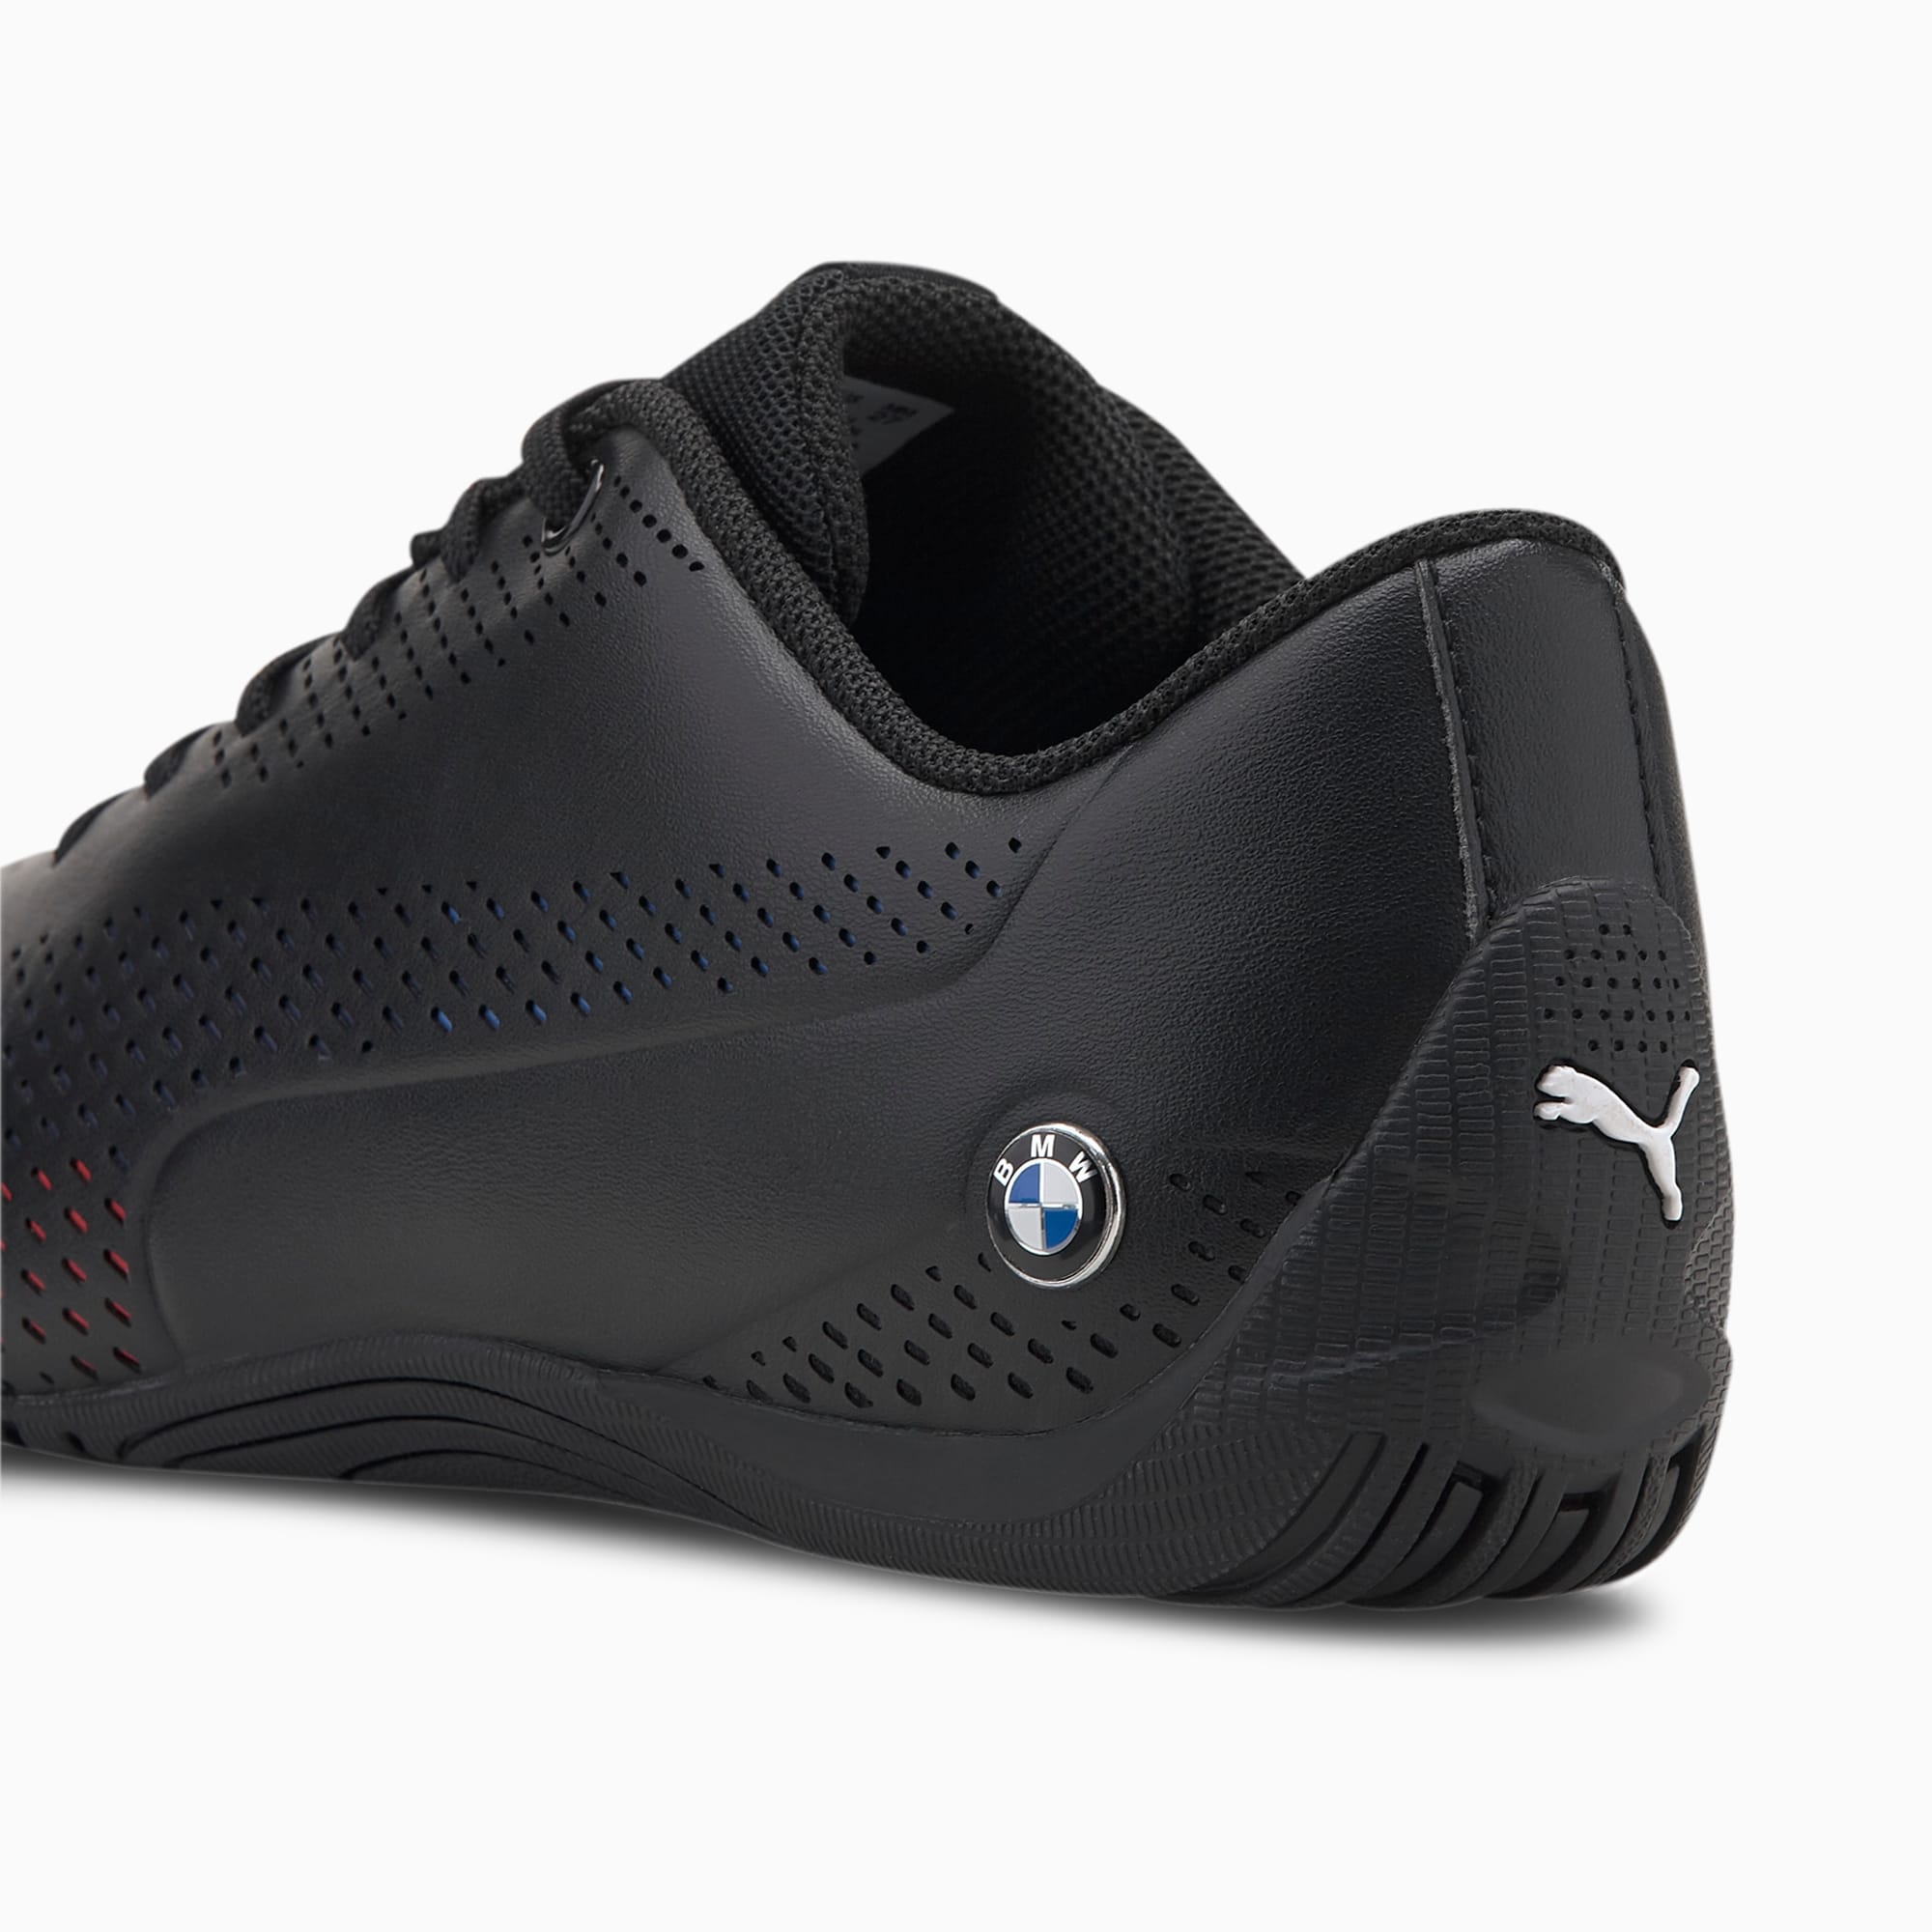 bound they aesthetic BMW M Motorsport Drift Cat 5 Ultra Shoes | PUMA Shoes | PUMA